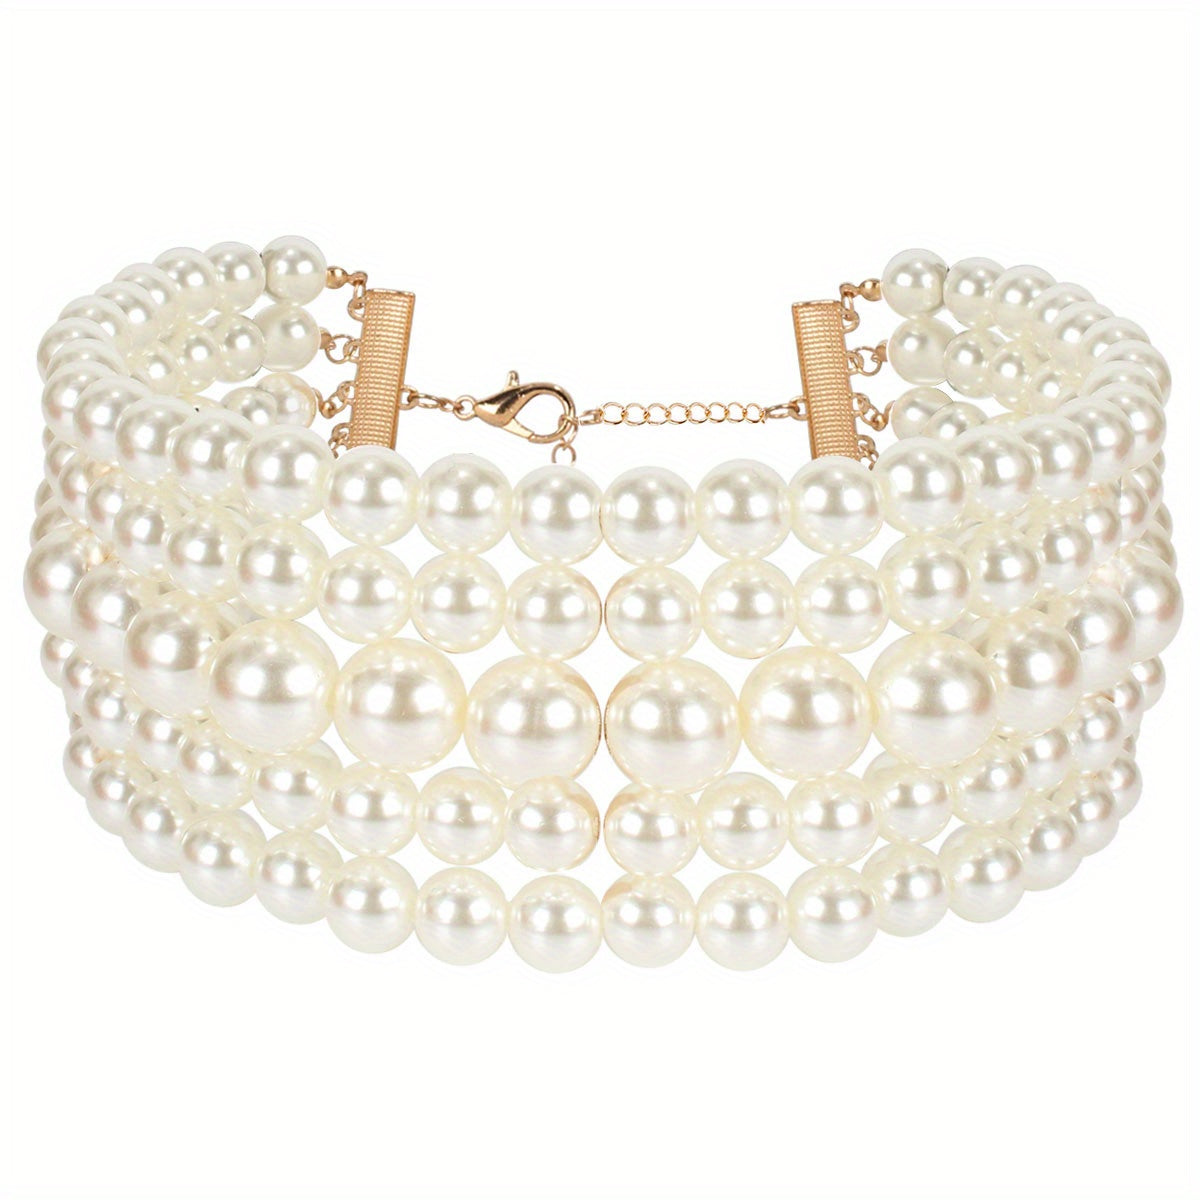 Multilayer Faux Pearl Necklace for Women - Elegant Sweater Chain Jewelry